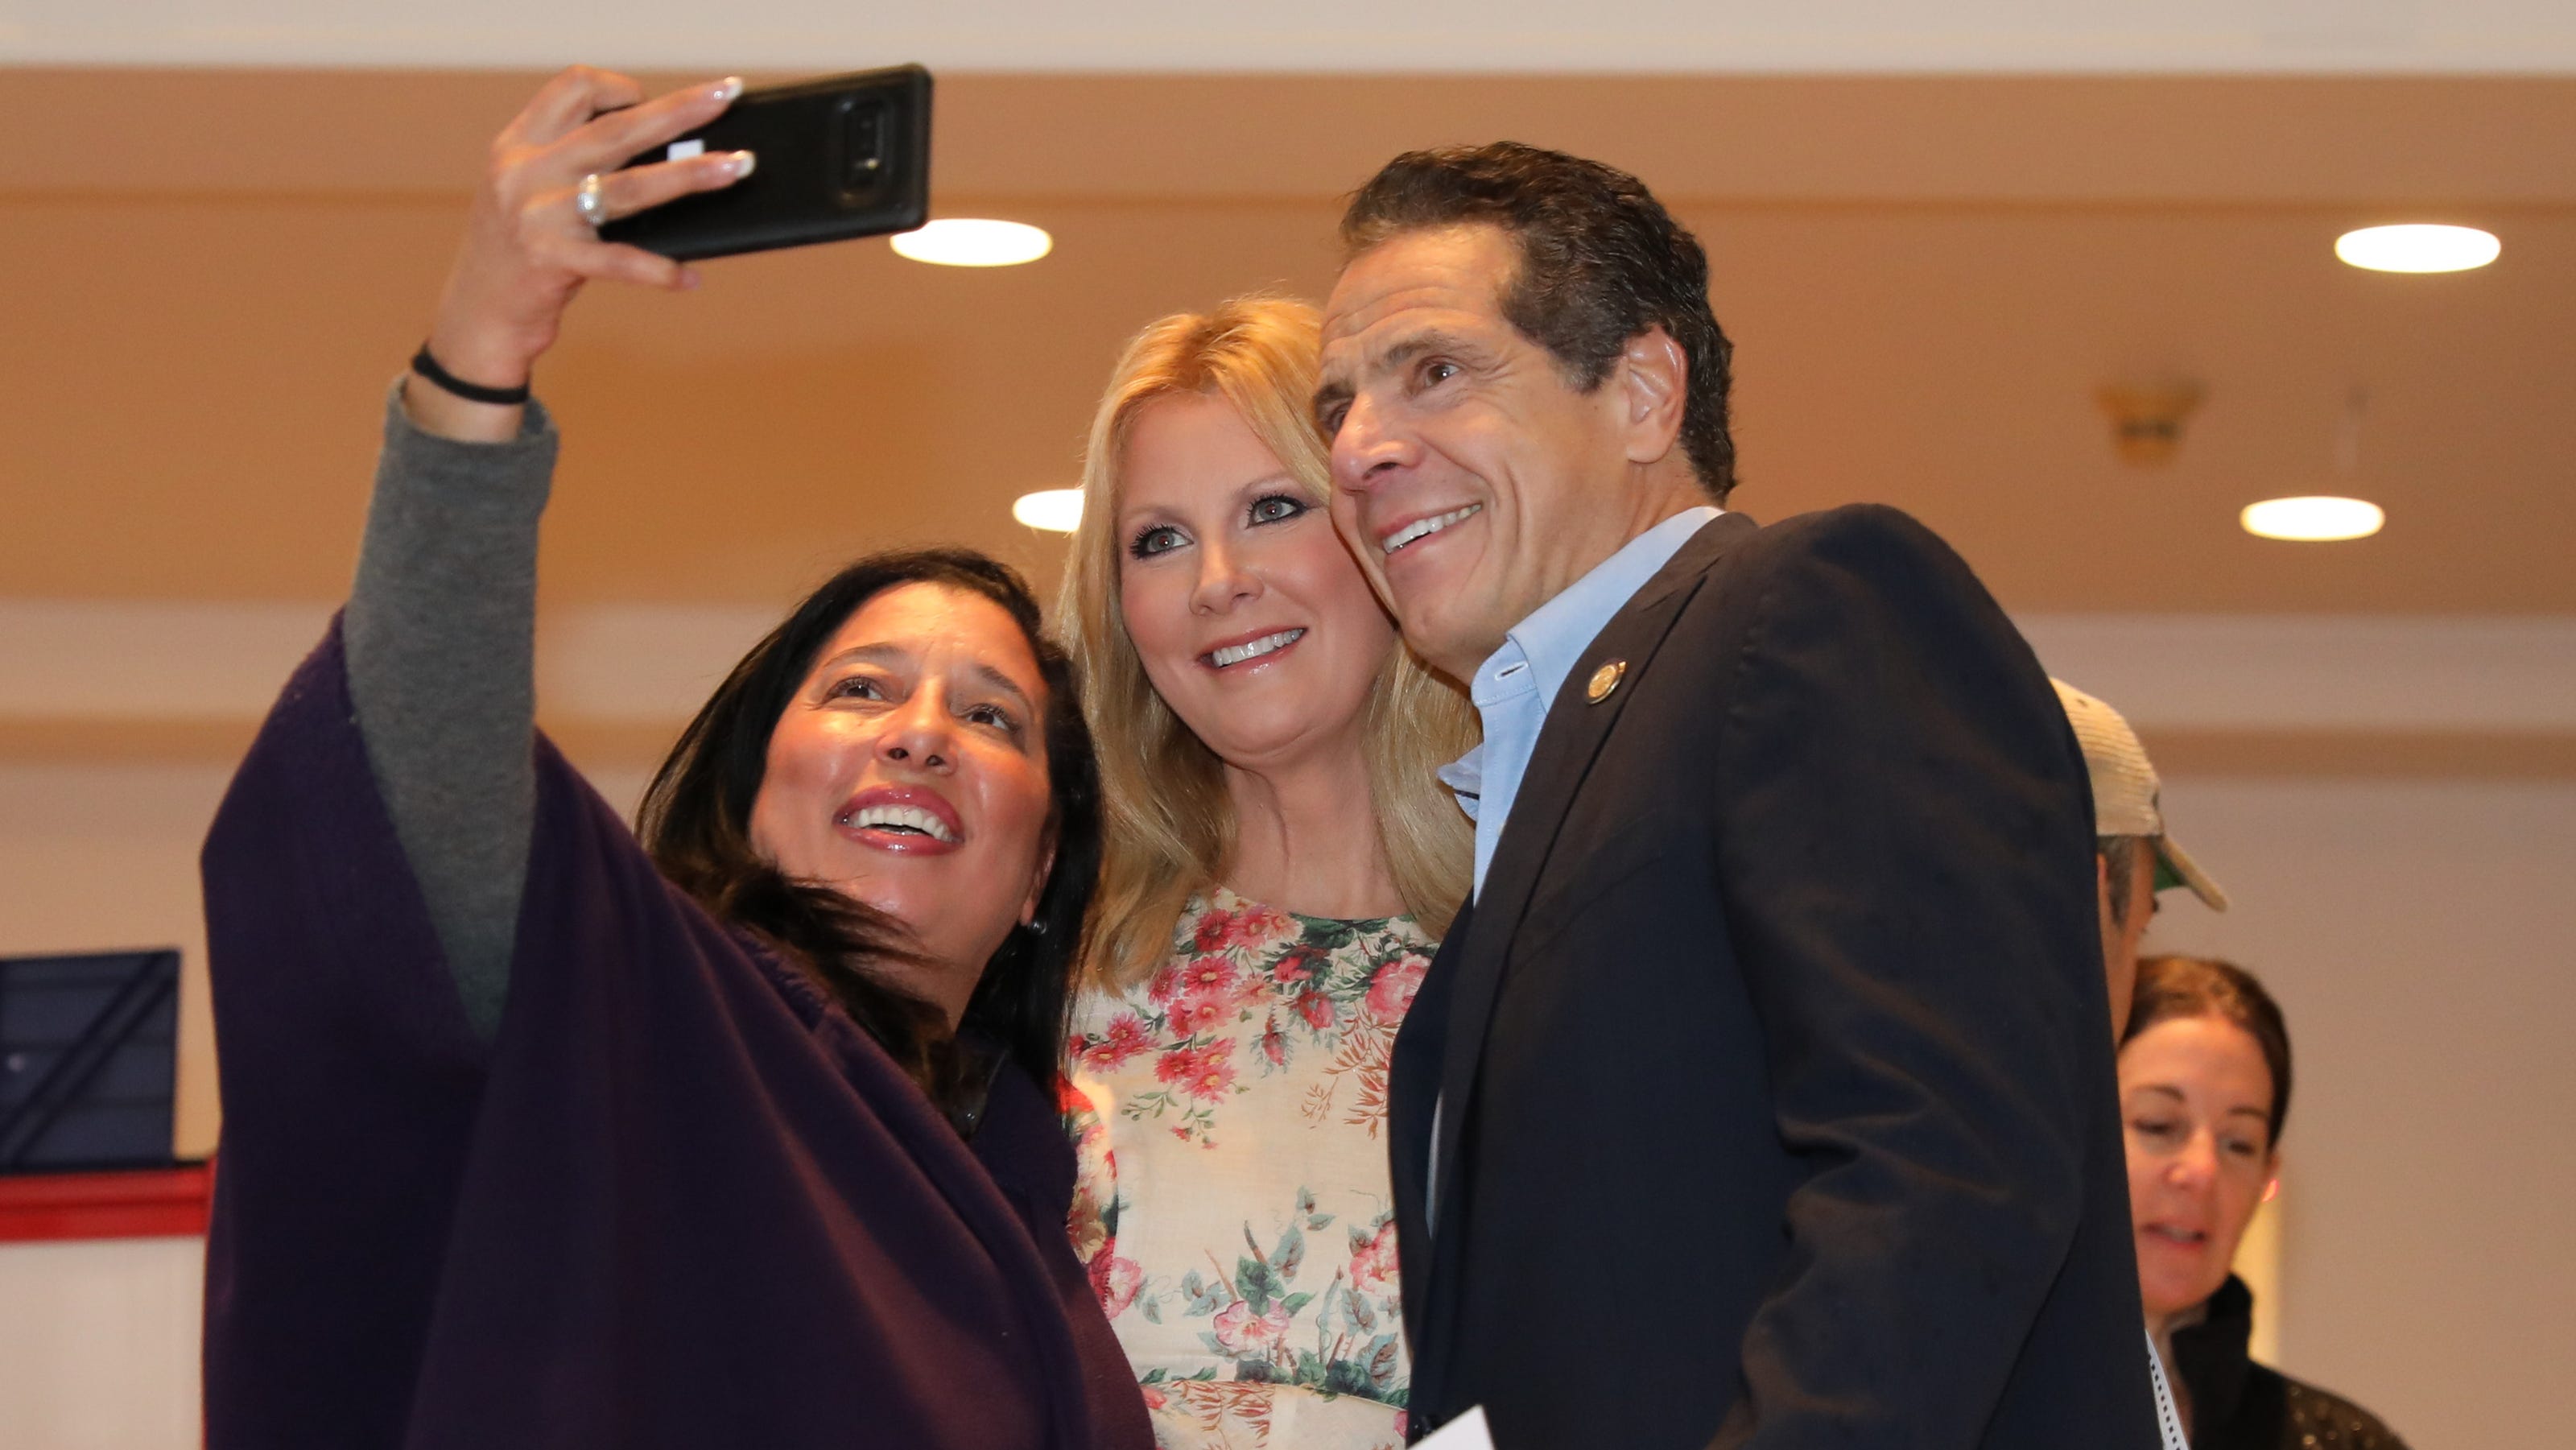 Andrew Cuomo and Sandra Lee split, dimming Westchester celeb wattage